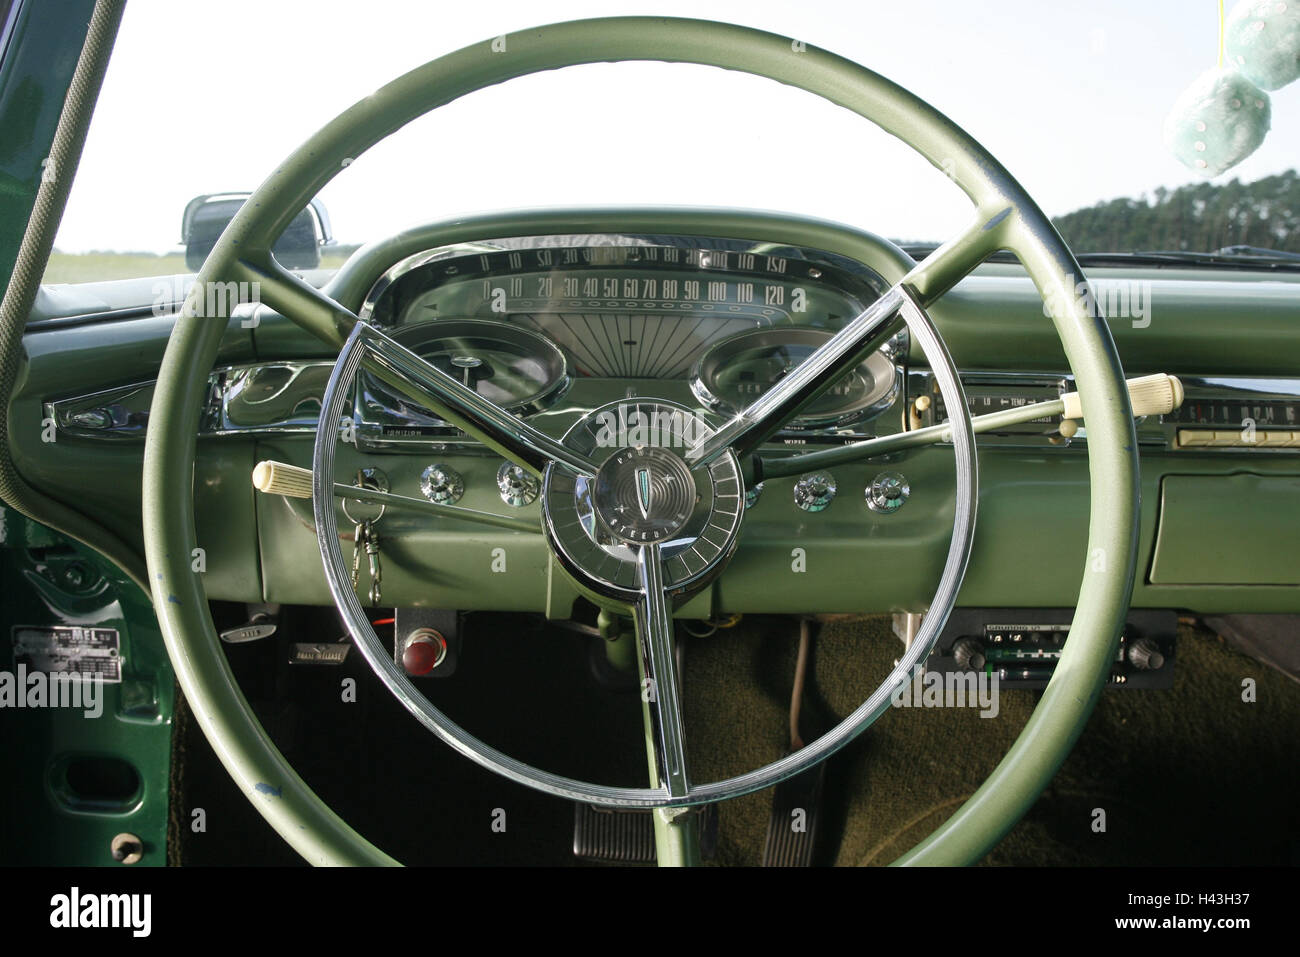 Old-timer, Ford Edsel, cockpit, the 50s, armatures, dash board, notch, car, detail, Ford-Edsel, interior, tax, old-timer, collector's item, green, inside, interior equipment, nostalgically, Stock Photo